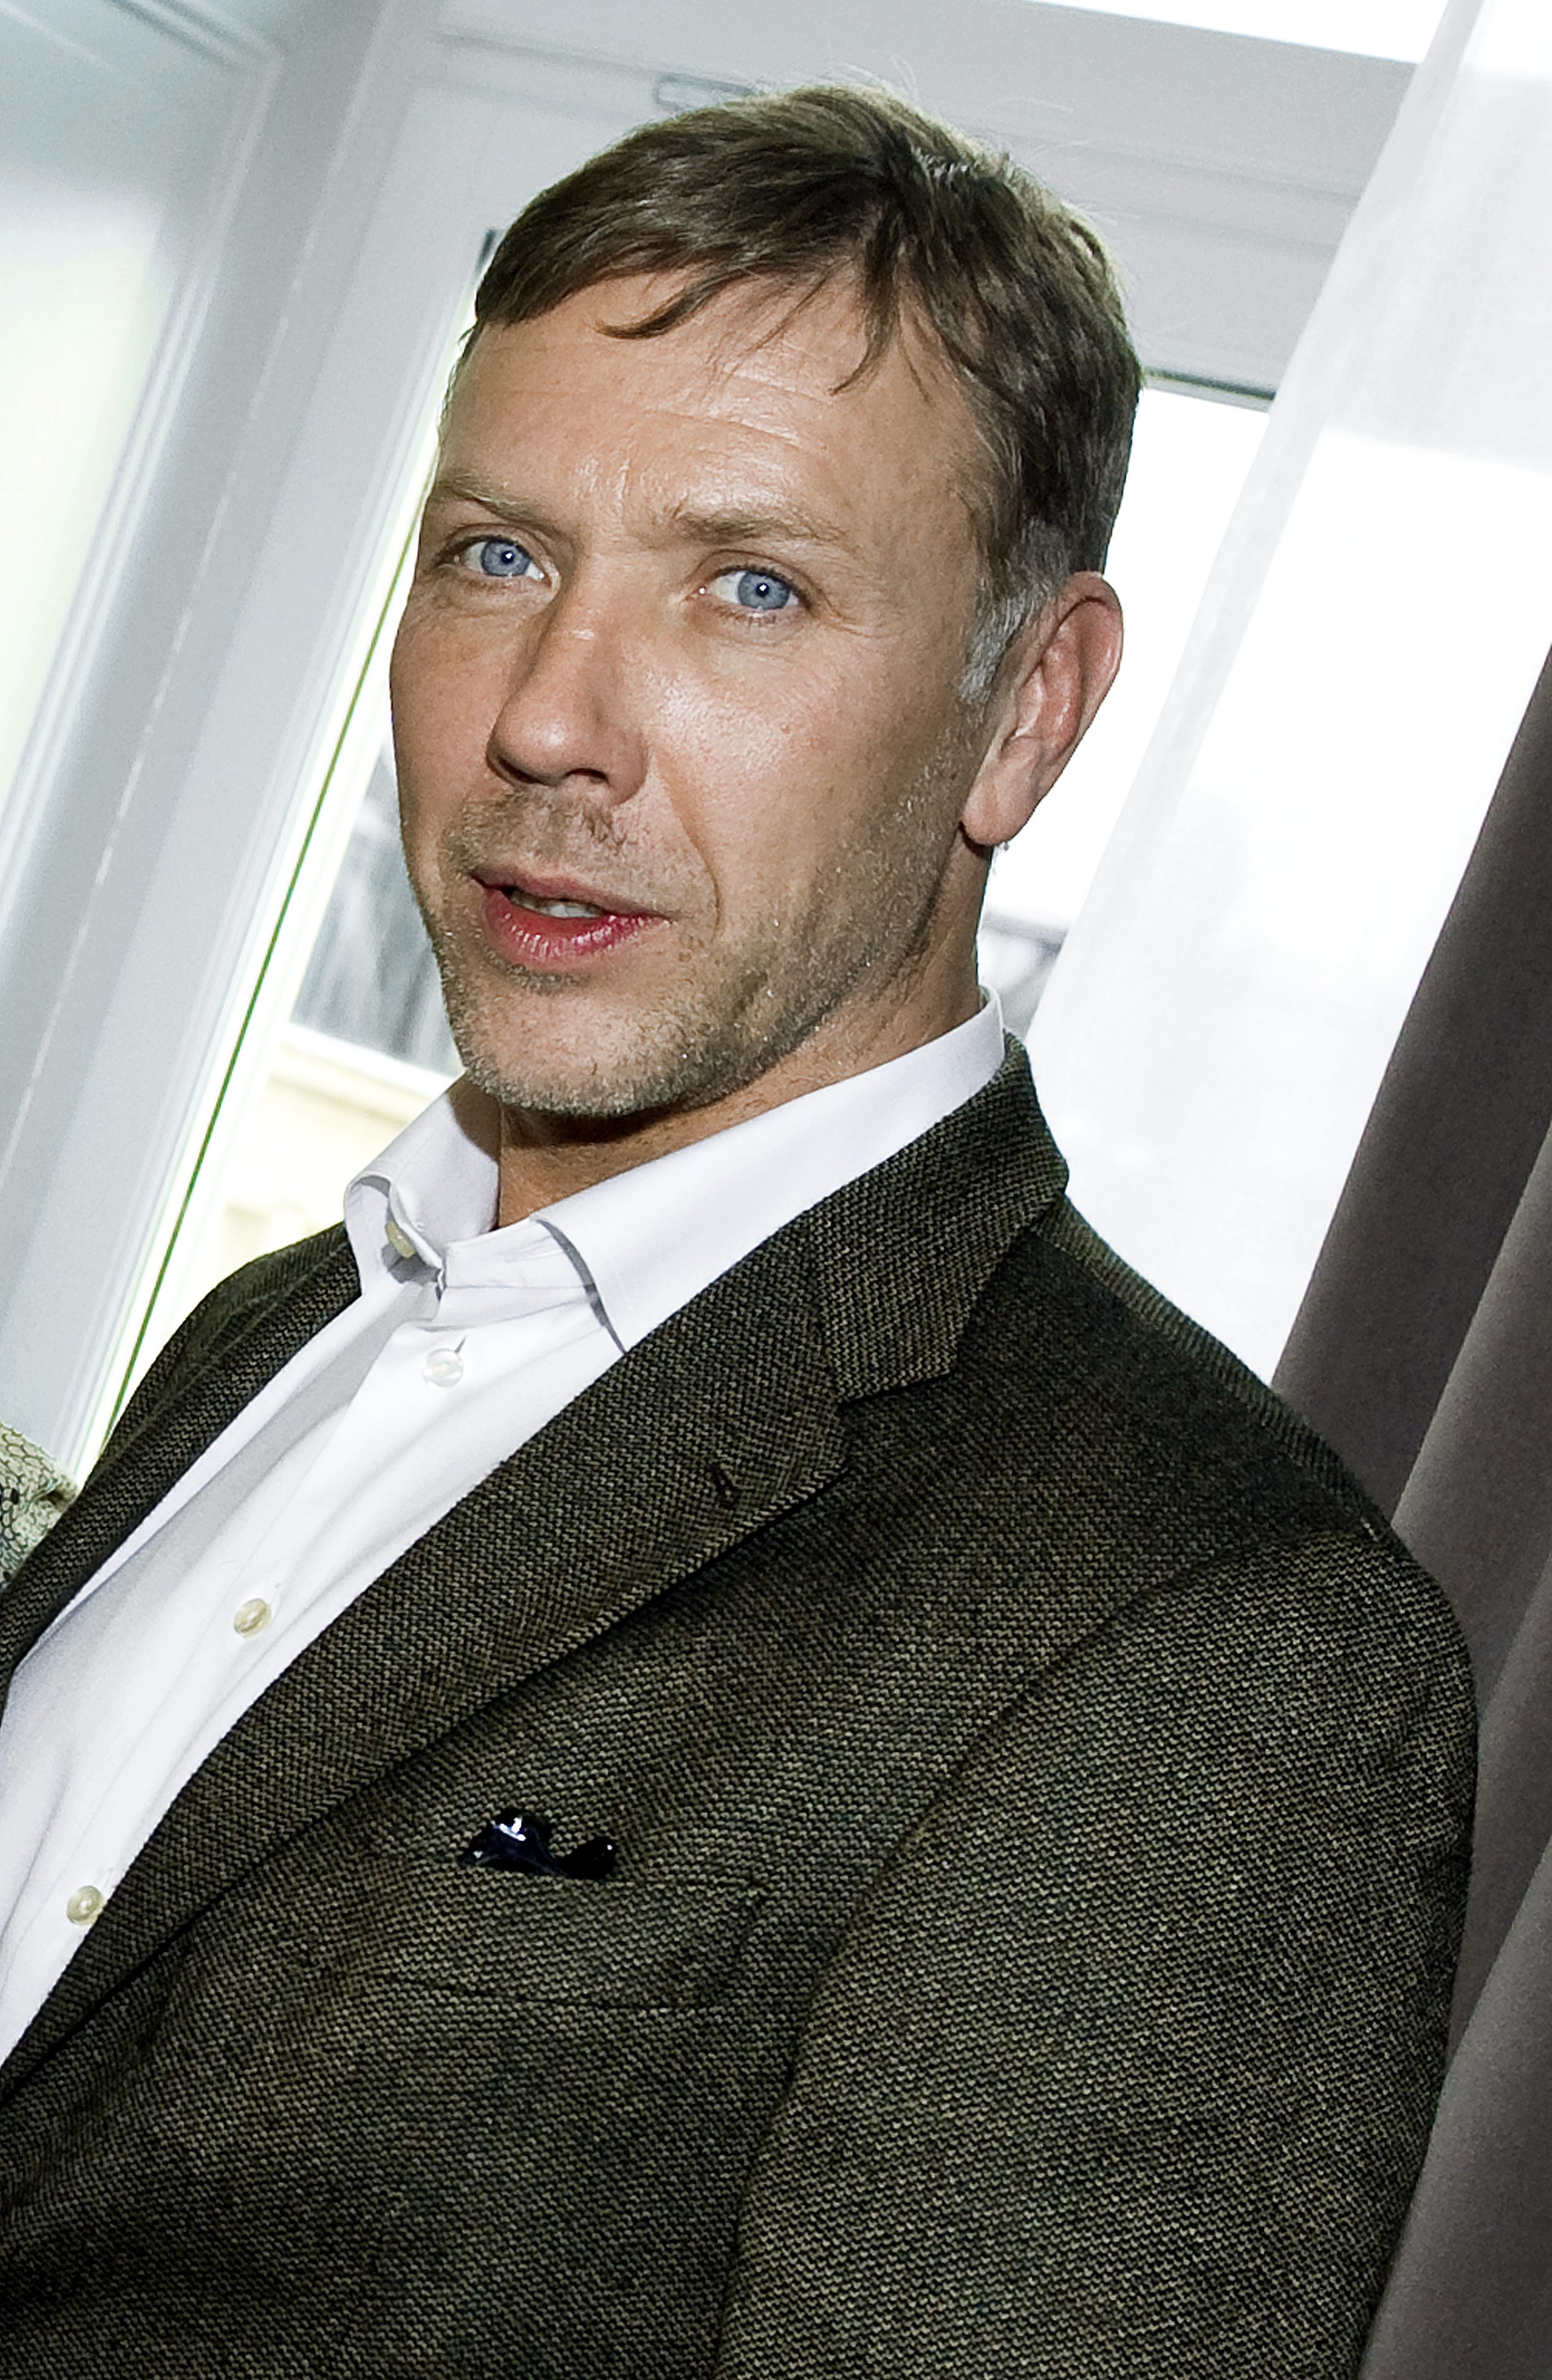 Hollywood, Ola Rapace, Fight, Film, Mikael Persbrandt, Slåss